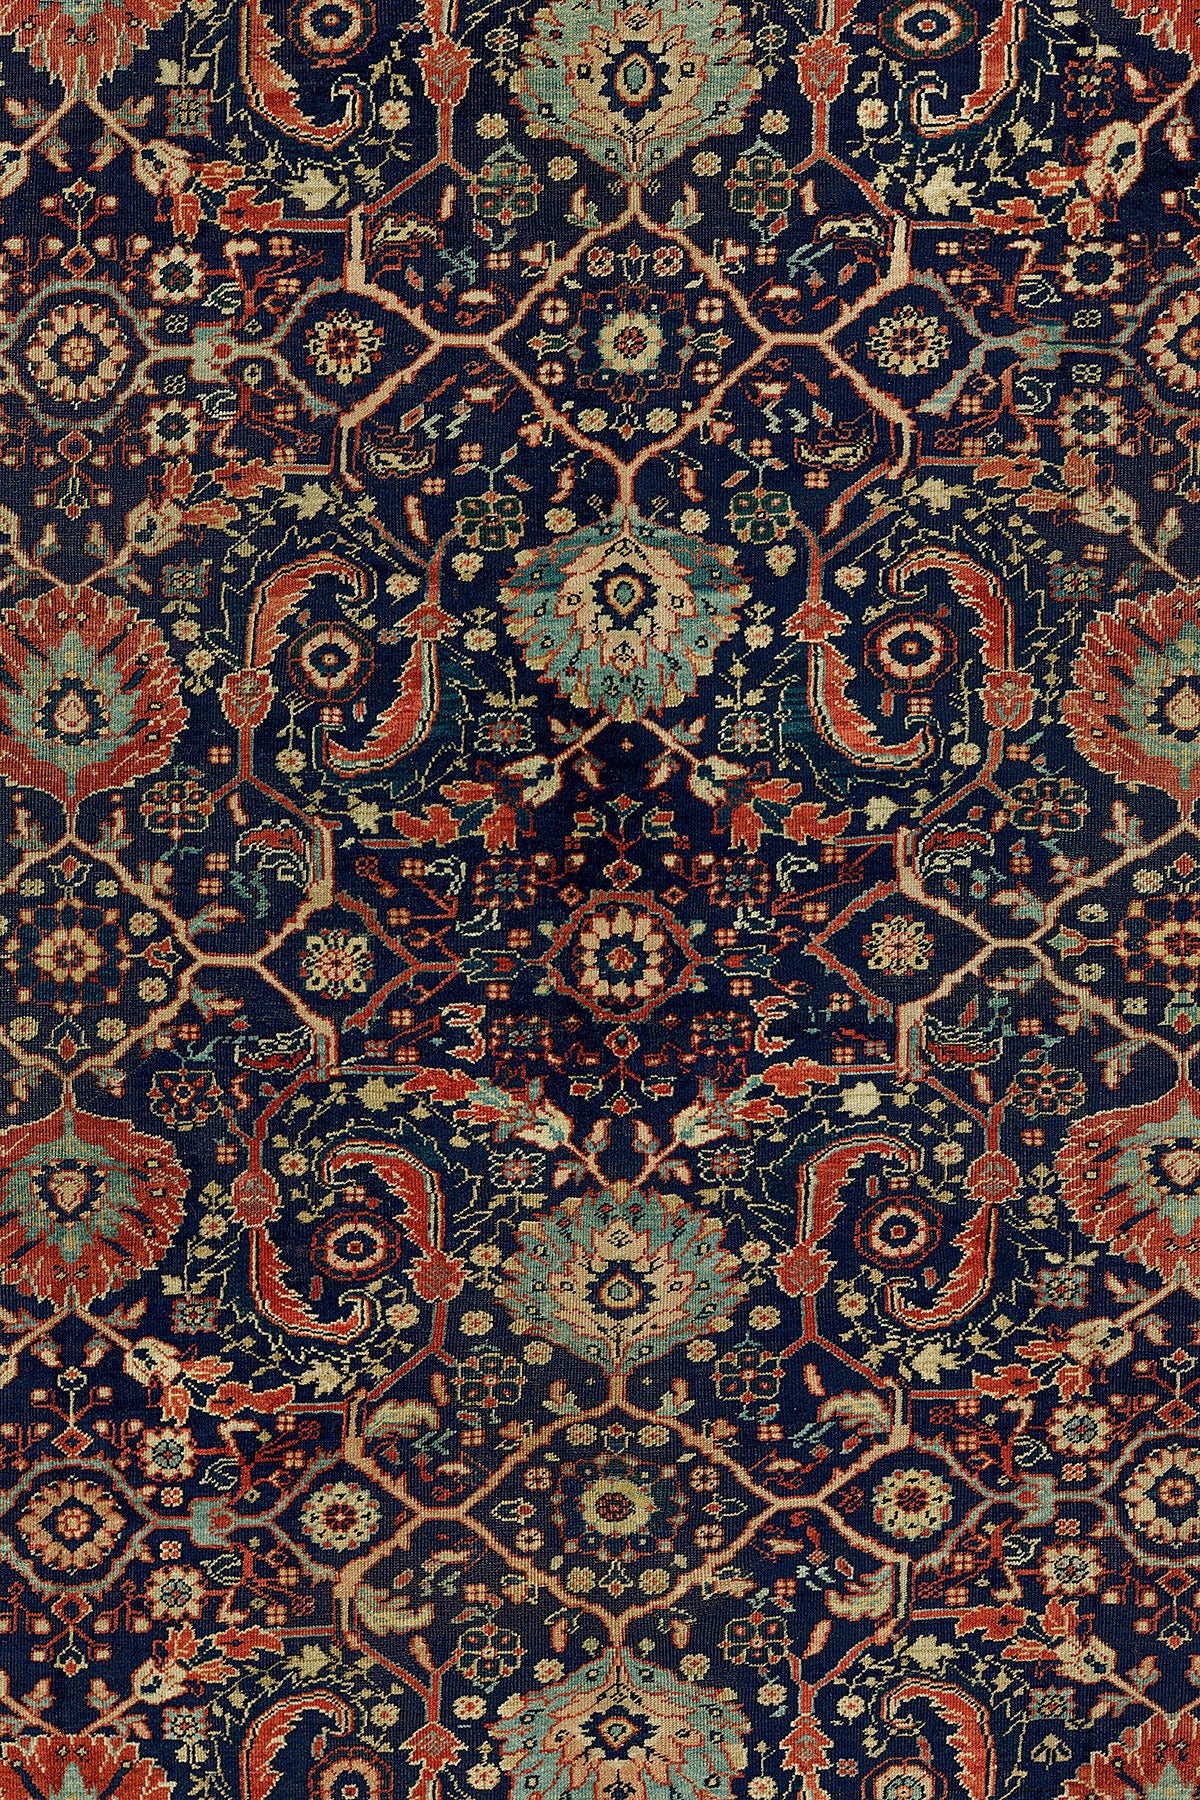 Navy ground, rusty red border early 20th century Persian Mahal Sultanabad rug.
Very good condition overall. Pictures shown from light and dark side

Measures: 12'10